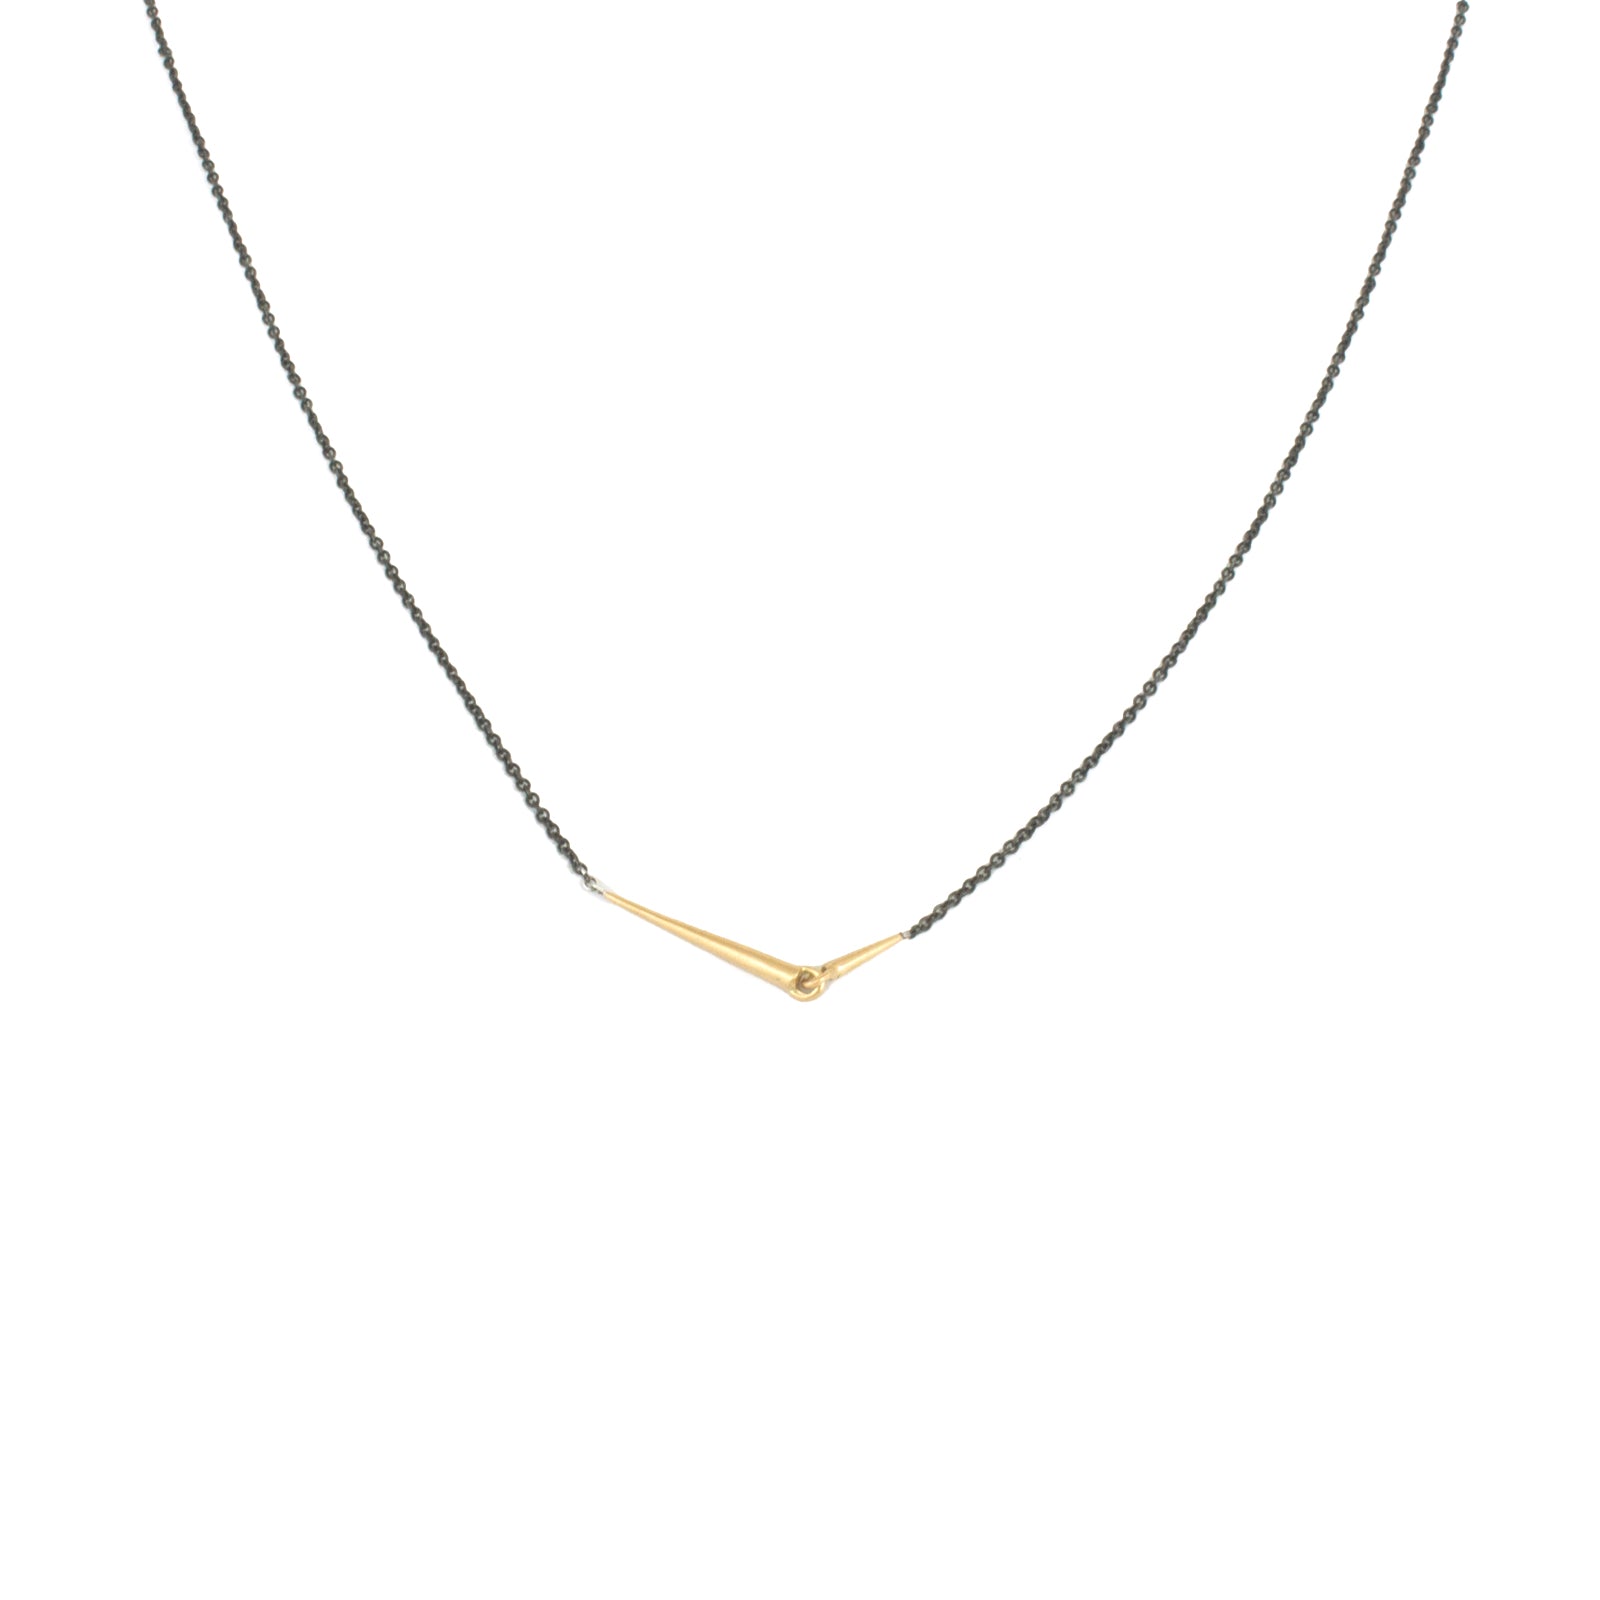 18k yellow gold with oxidized silver chain / medium mirror points necklace